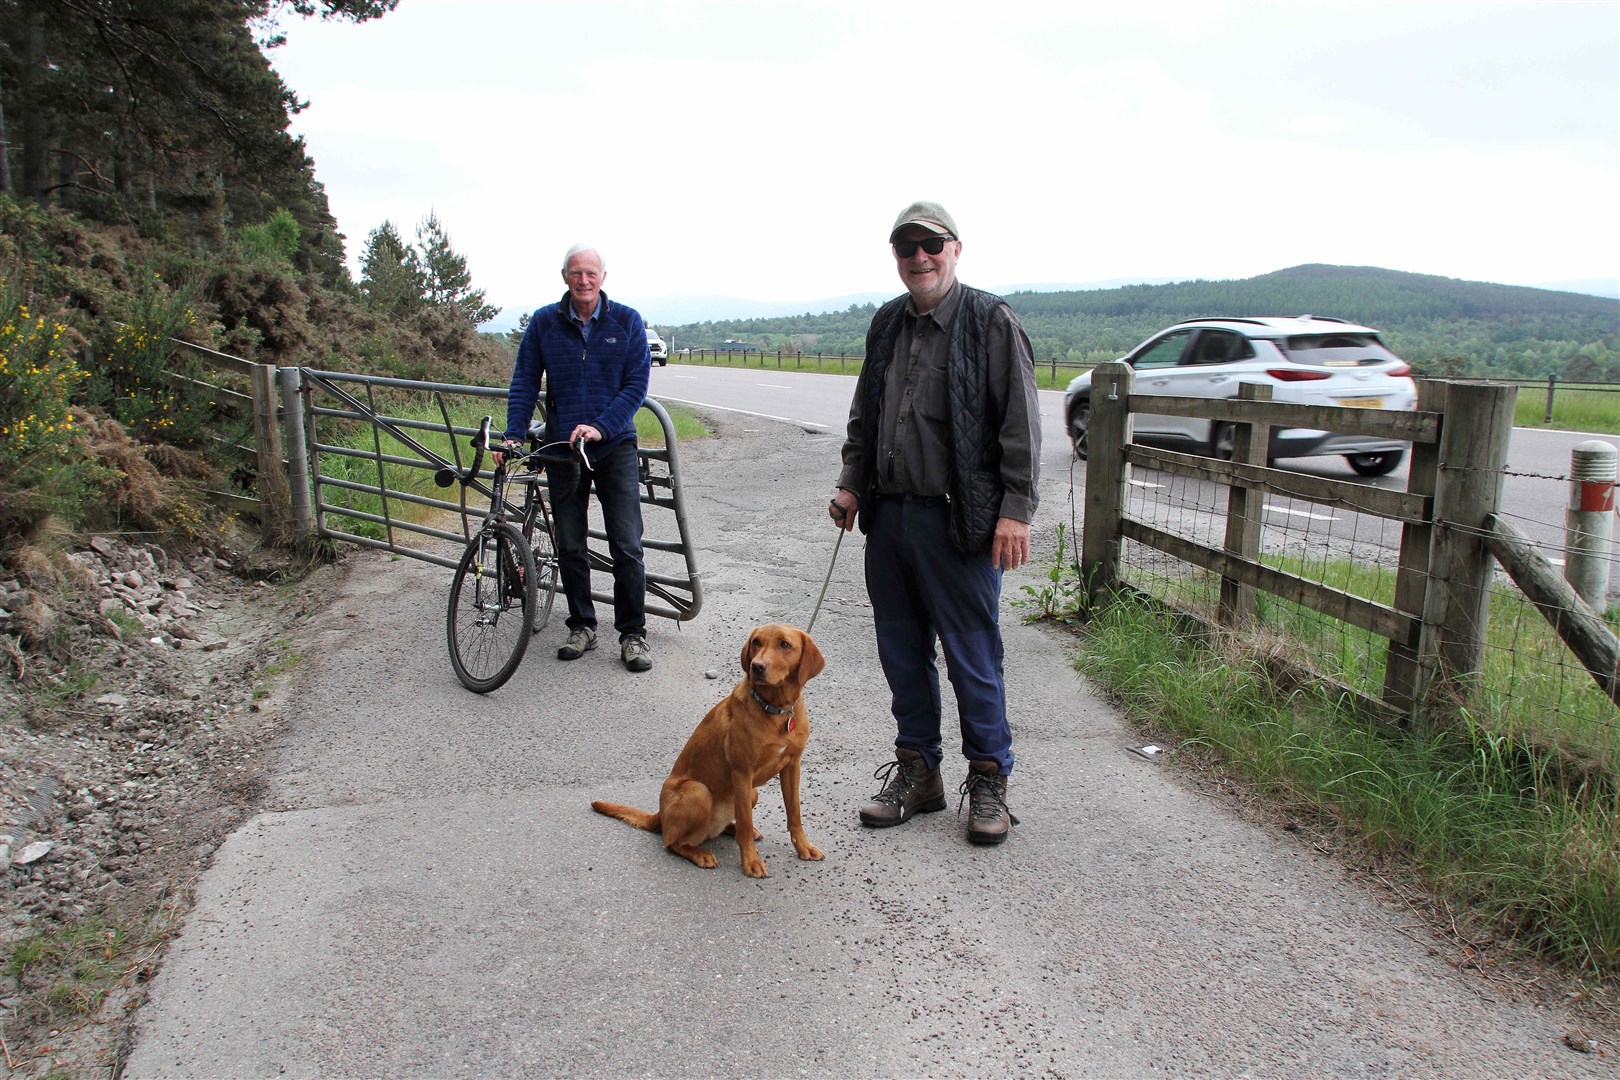 Campaigners Nigel Williams and Charlie Whelan next to the busy A95 which is the only dedicated direct link between Dulnain Bridge and Grantown at this time. They were pictured last summer at the time of the funding confirmation.